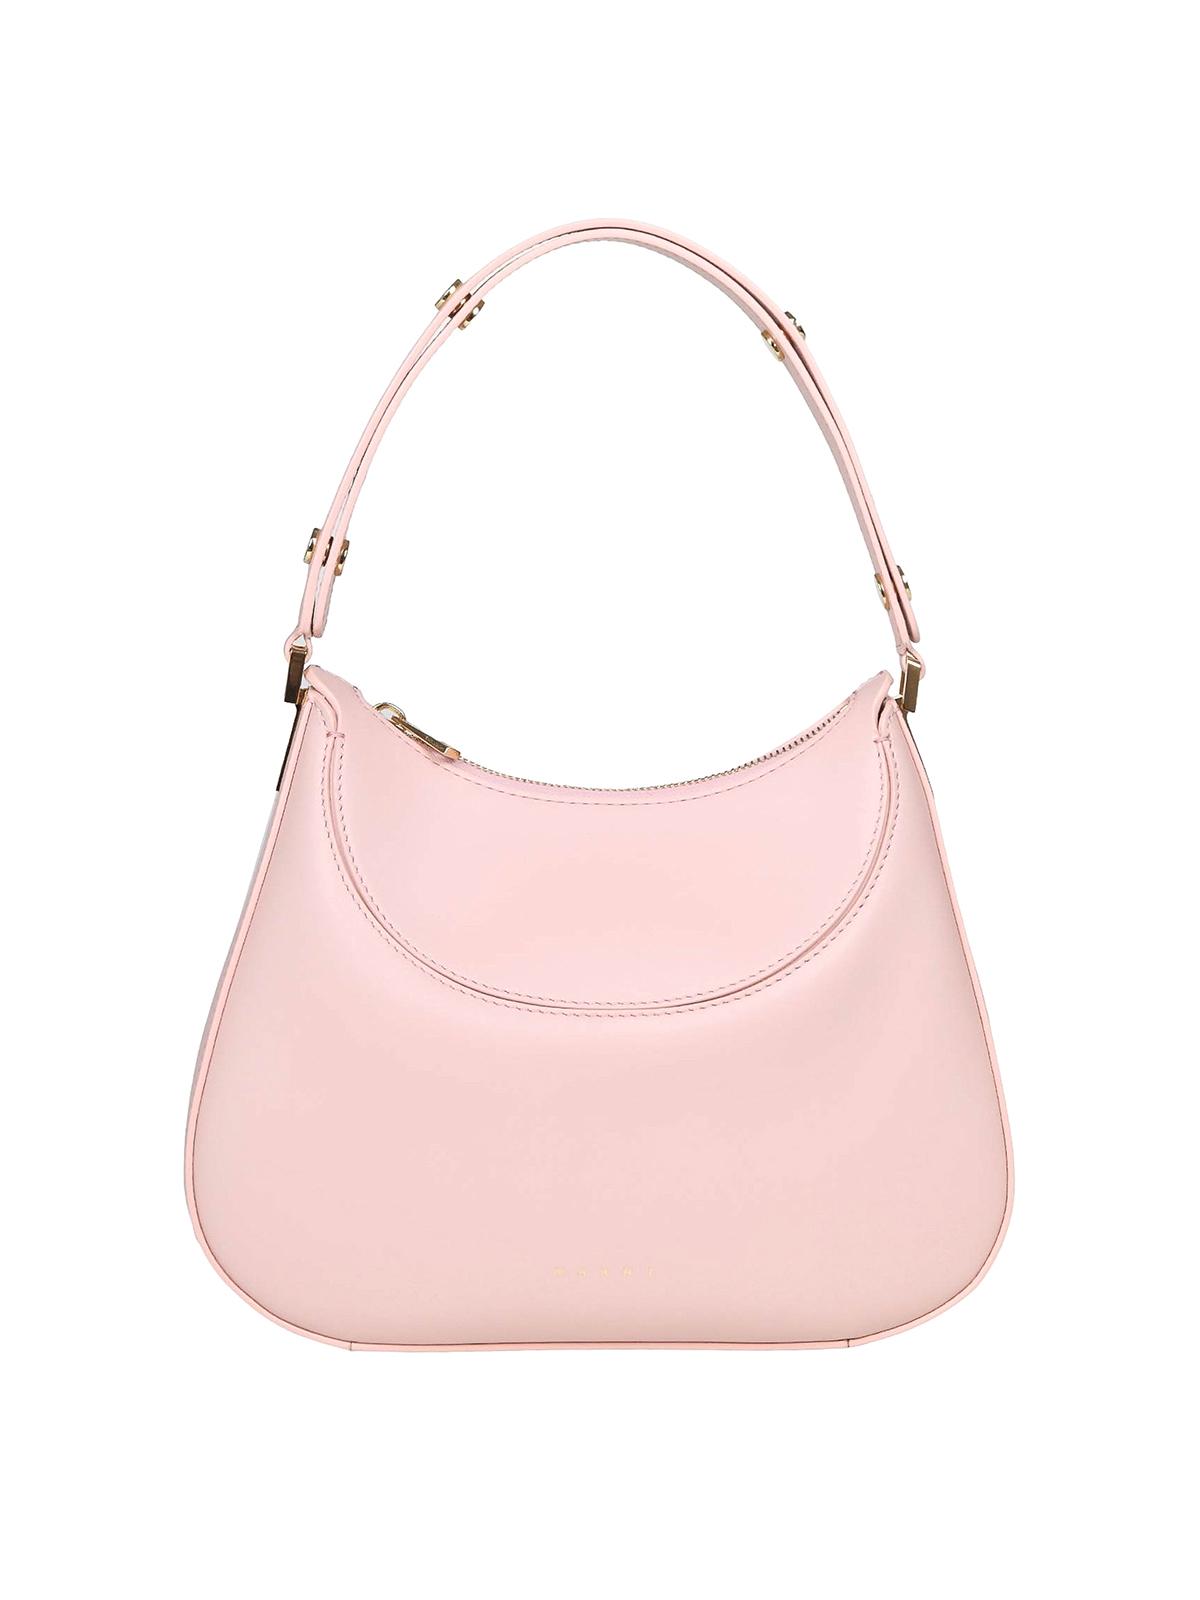 100% AUTHENTIC MARC JACOBS SMALL PINK LEATHER HOBO HANDBAG, ITALY